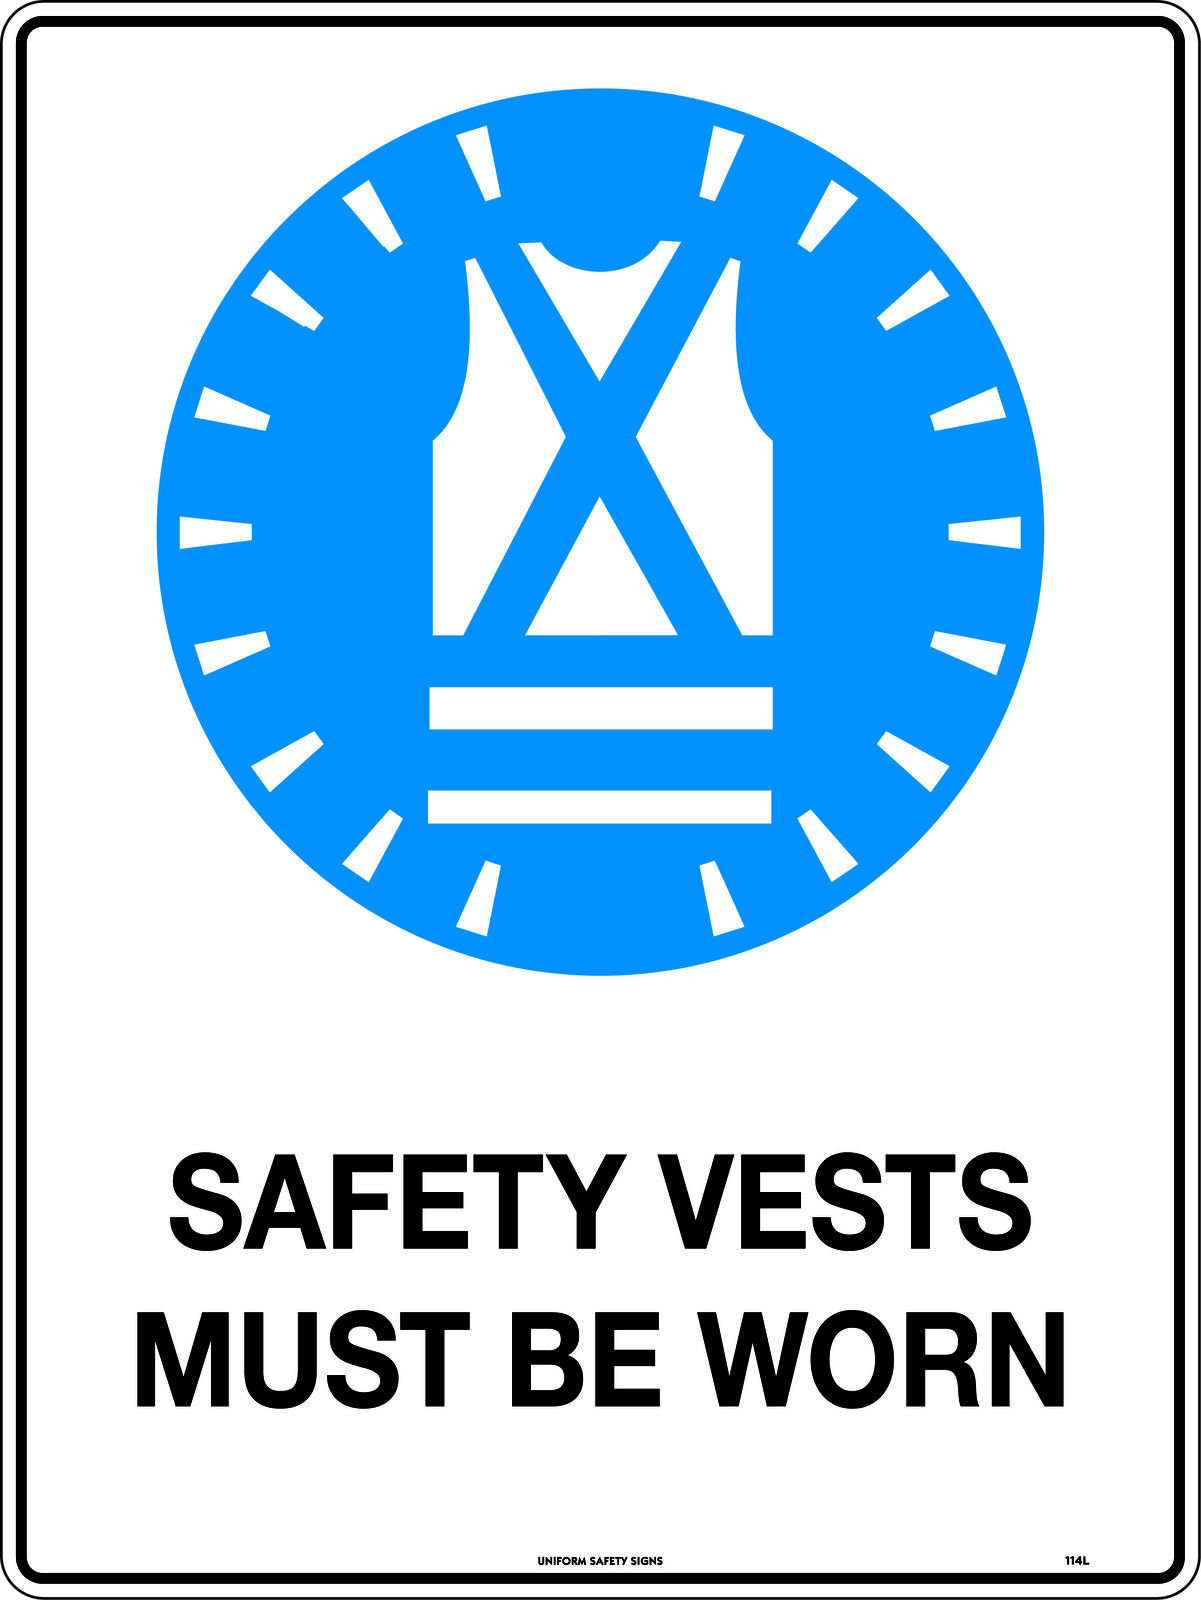 Safety Vests Must Be Worn Safety Sign Uniform Safety Signs Price Match Guarantee